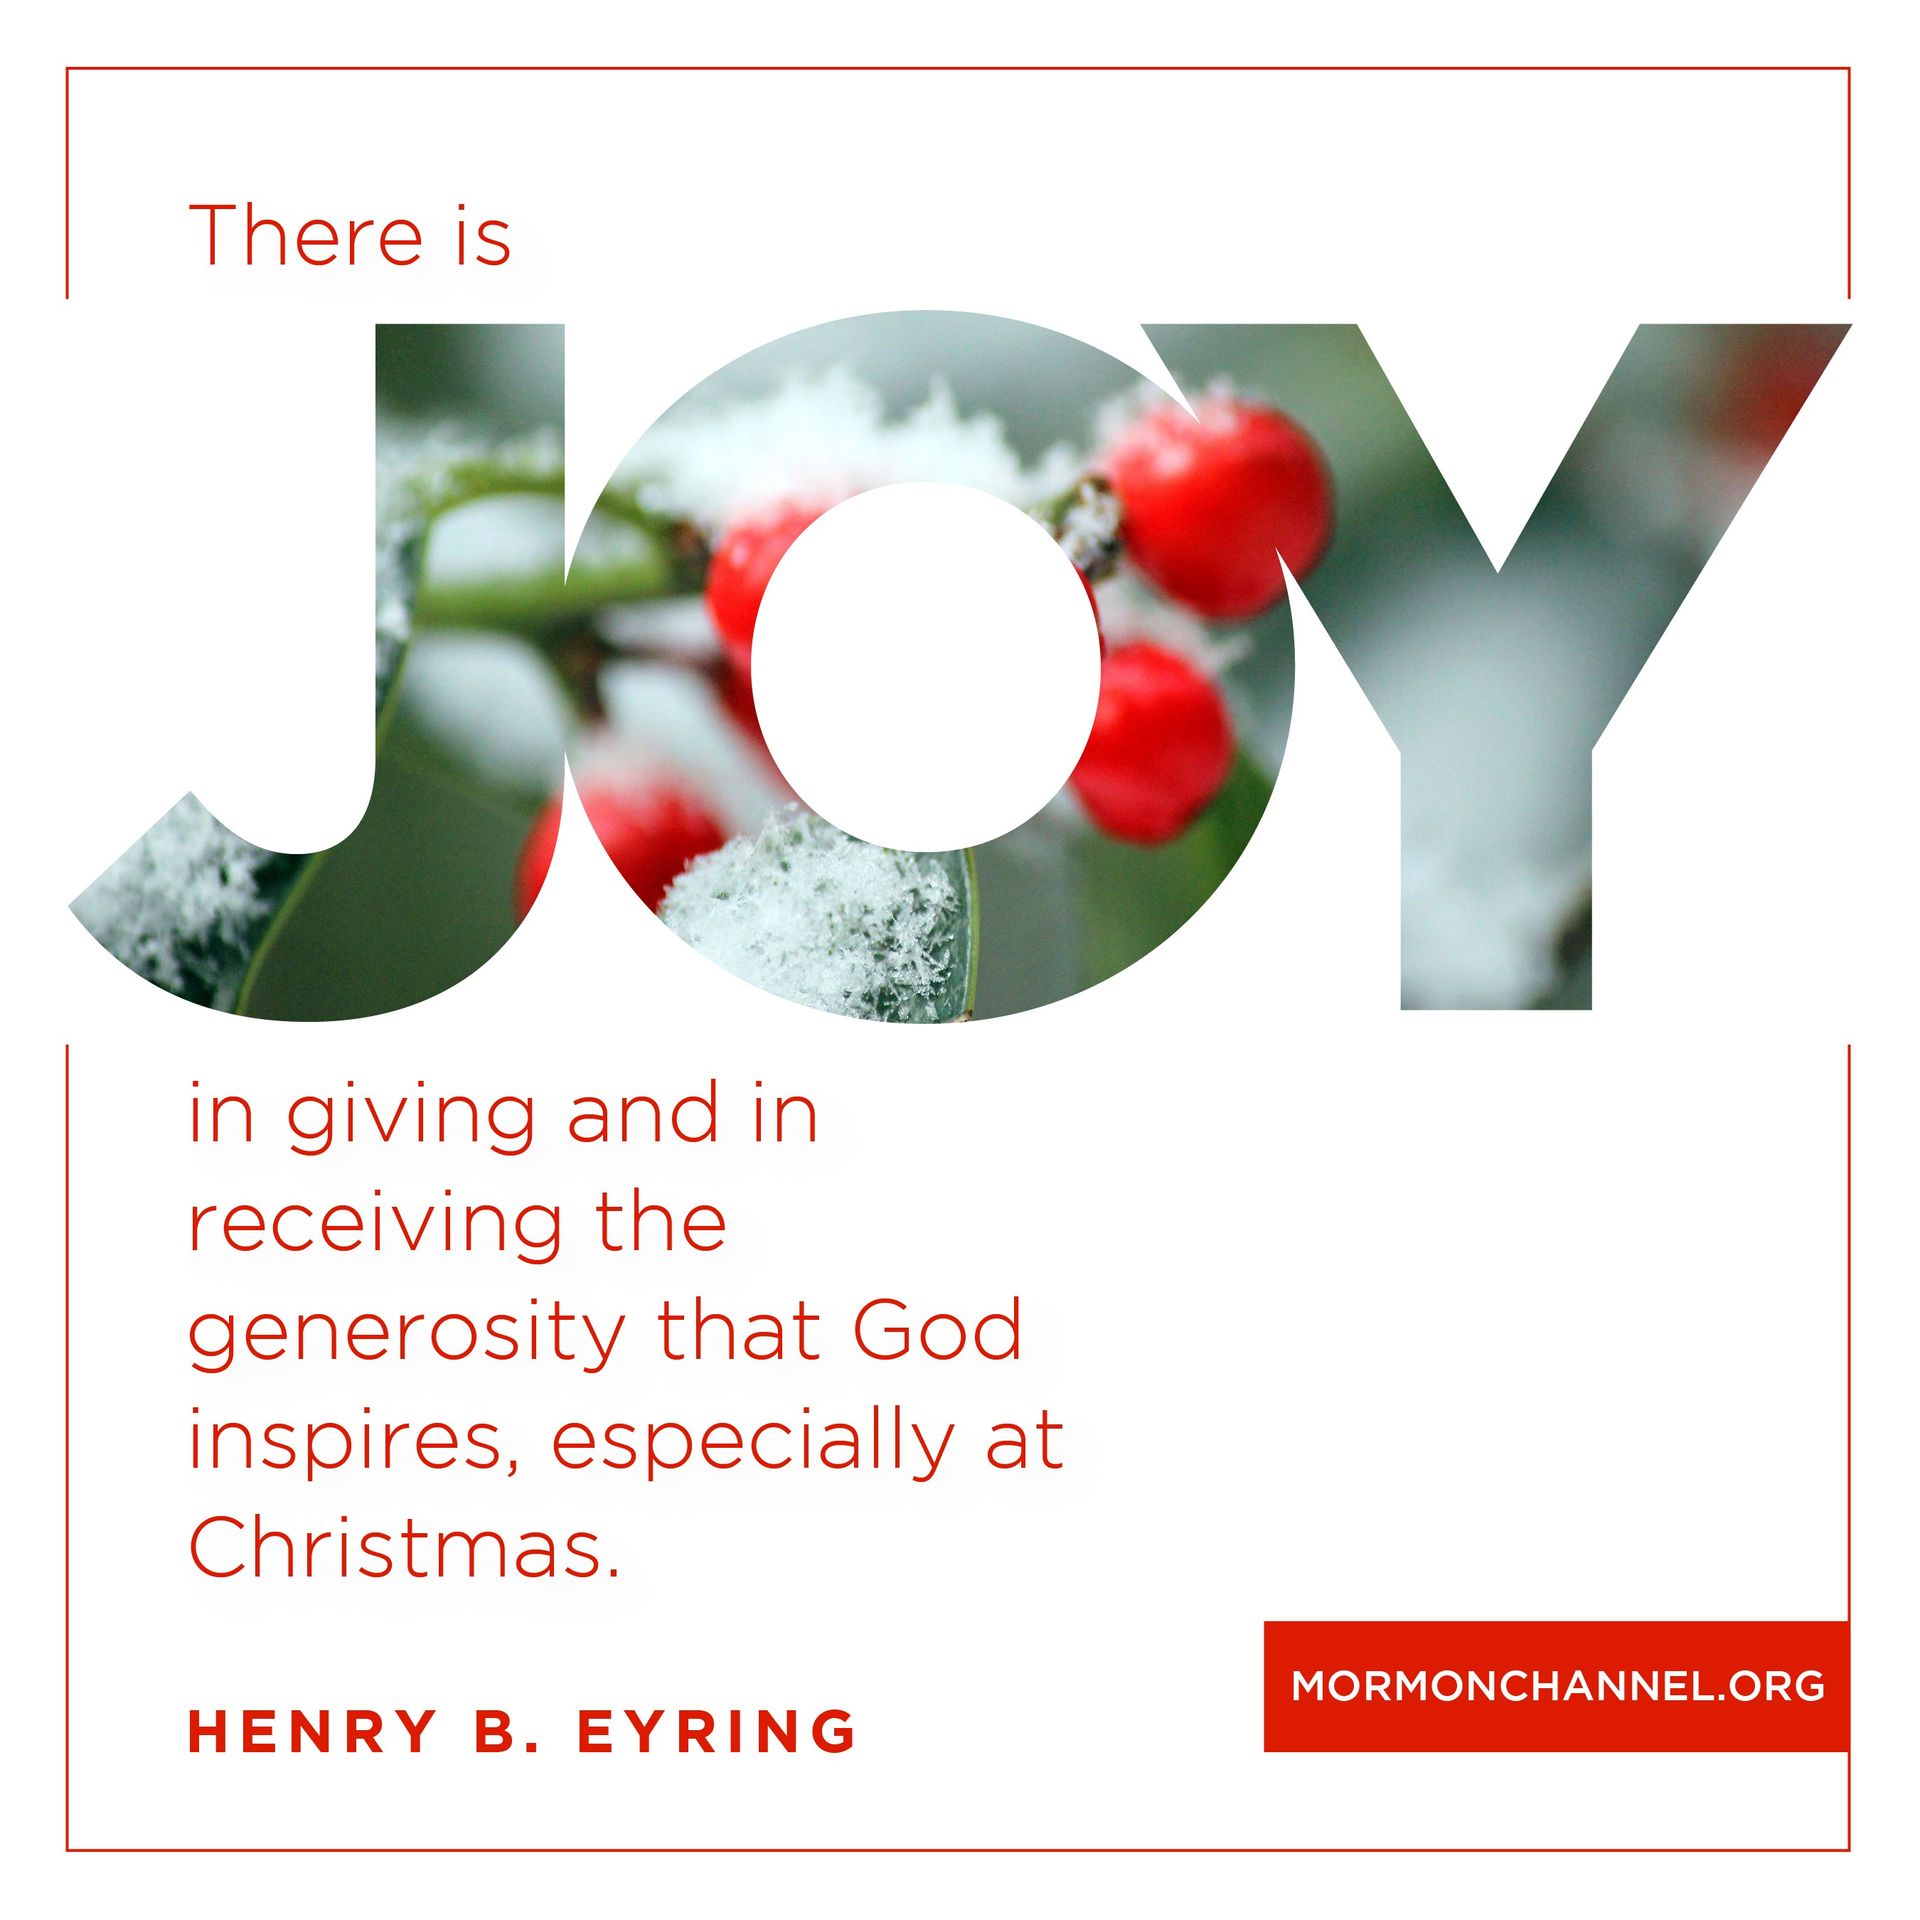 “There is joy in giving and in receiving the generosity that God inspires, especially at Christmas. ”—President Henry B. Eyring, “Home for Christmas” © undefined ipCode 1.